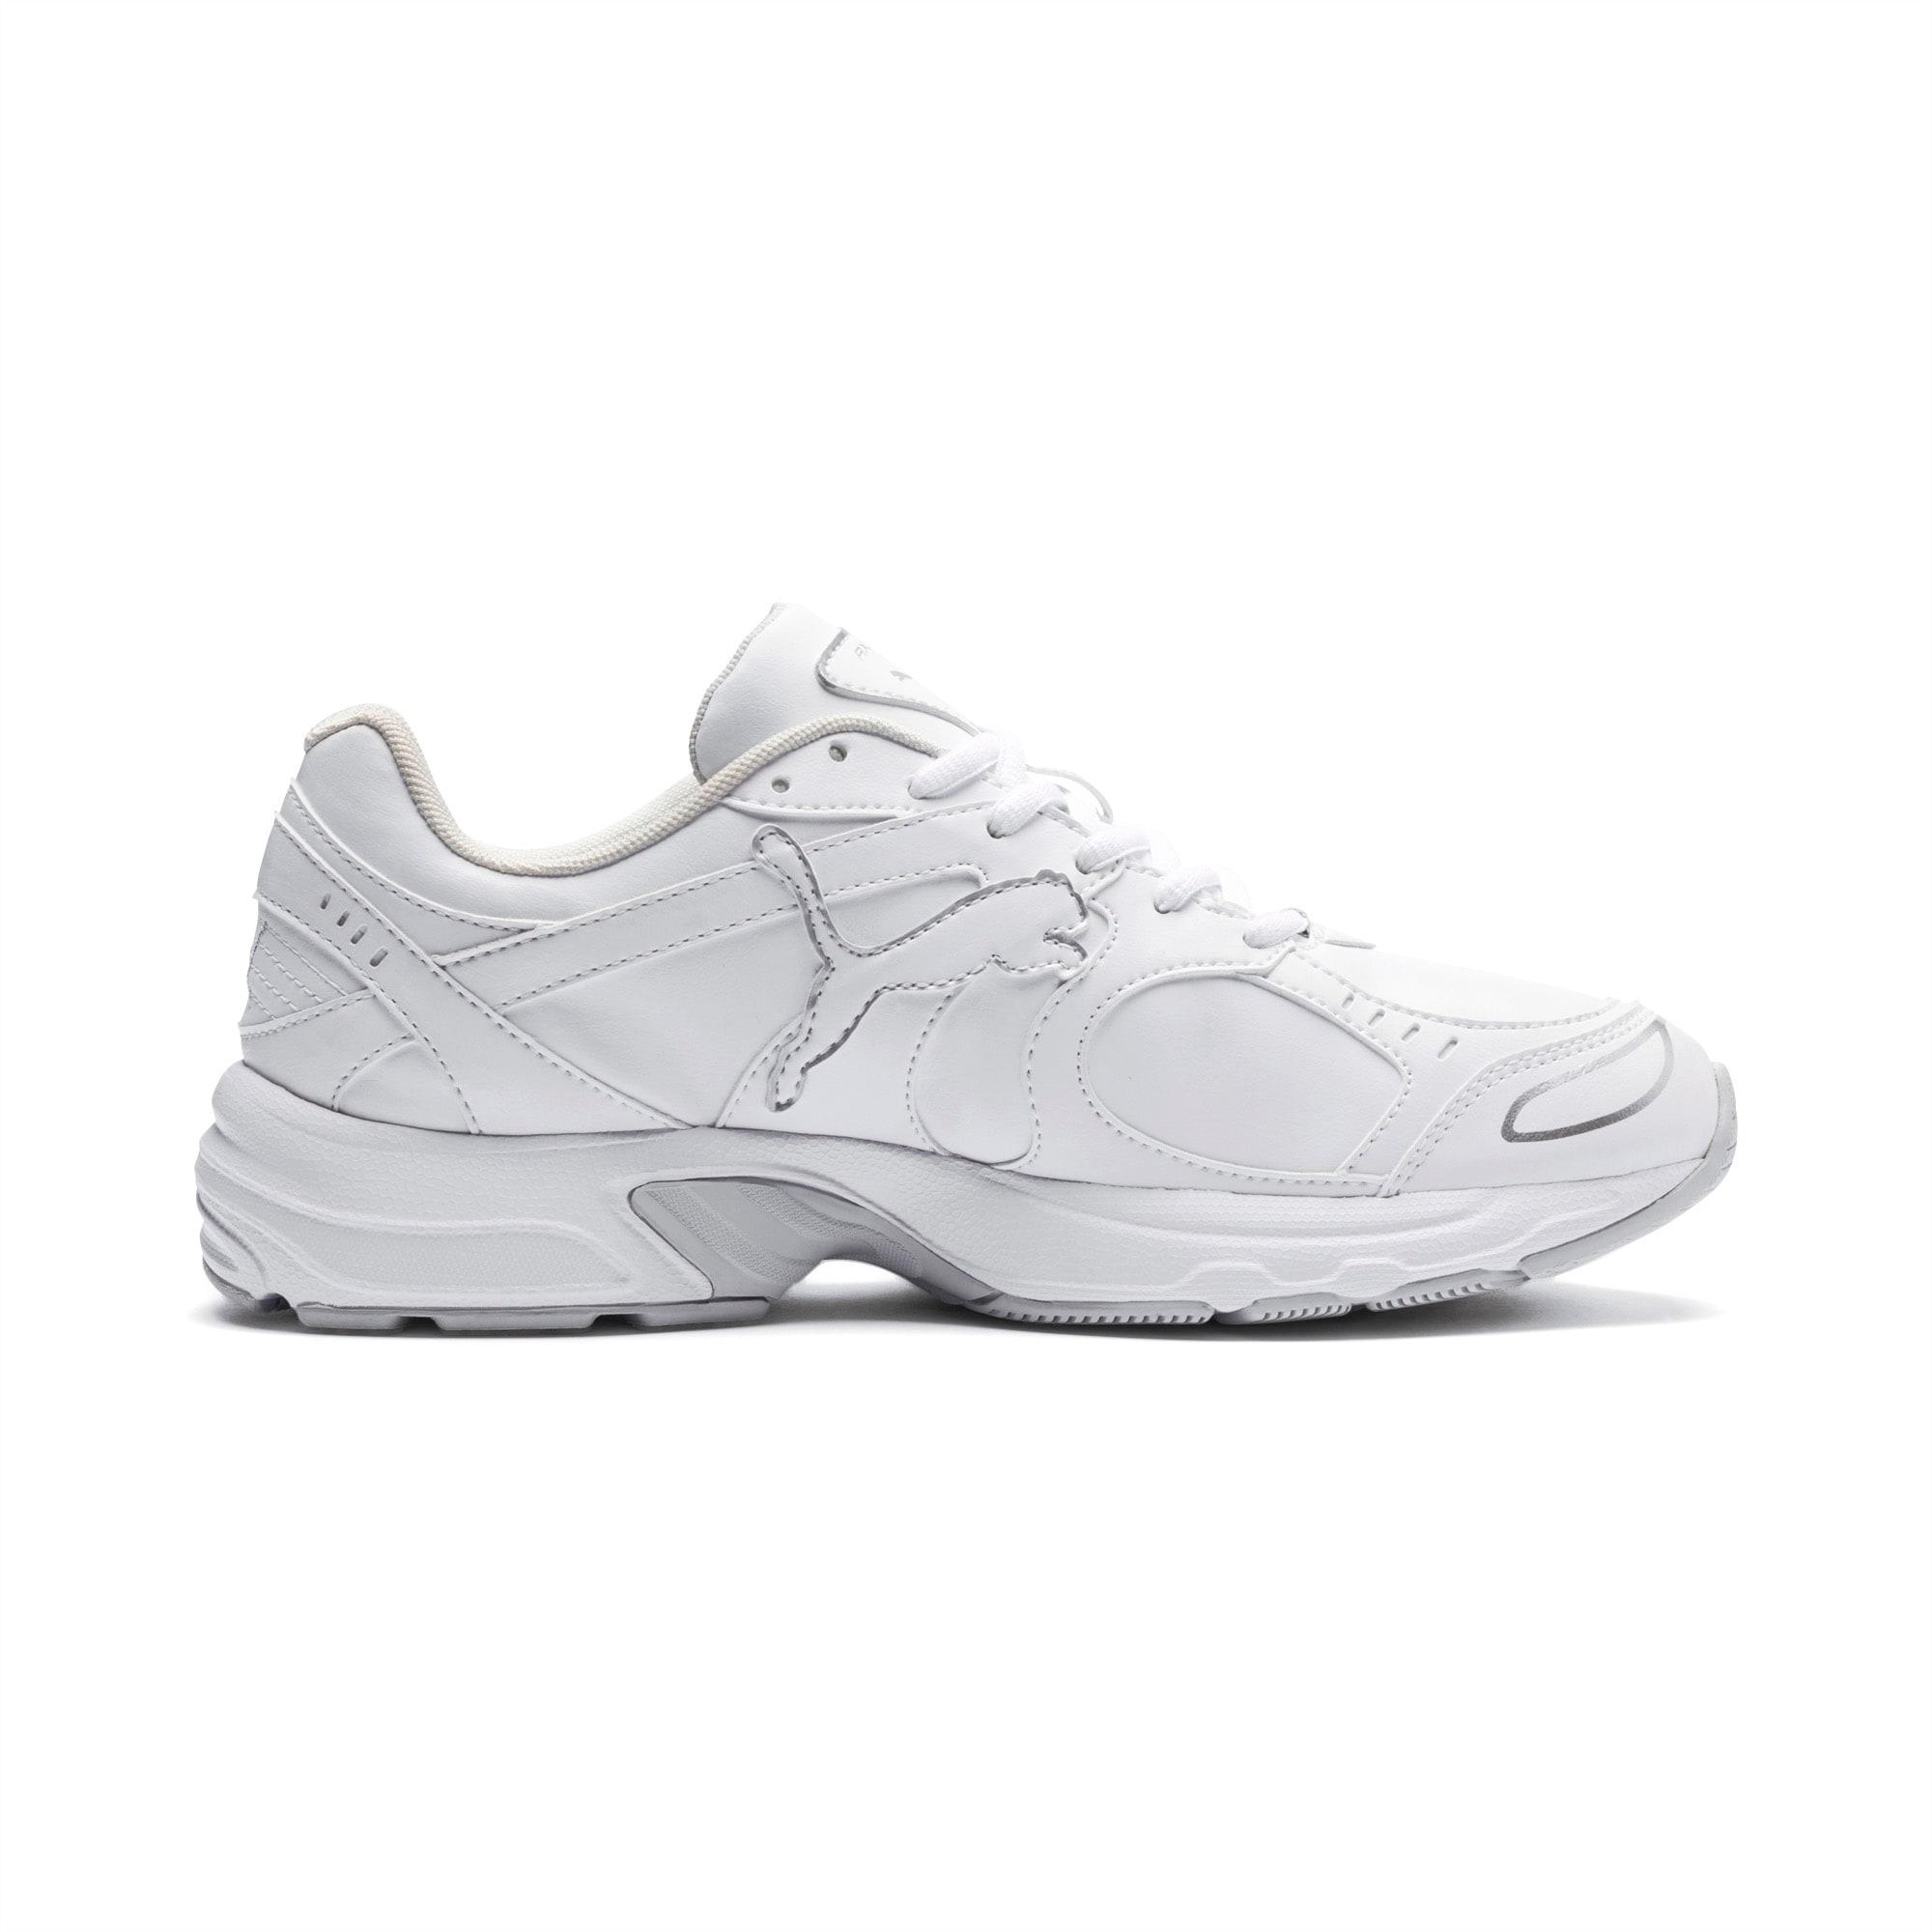 PUMA Synthetic Axis Sl Sneakers in White for Men - Lyst